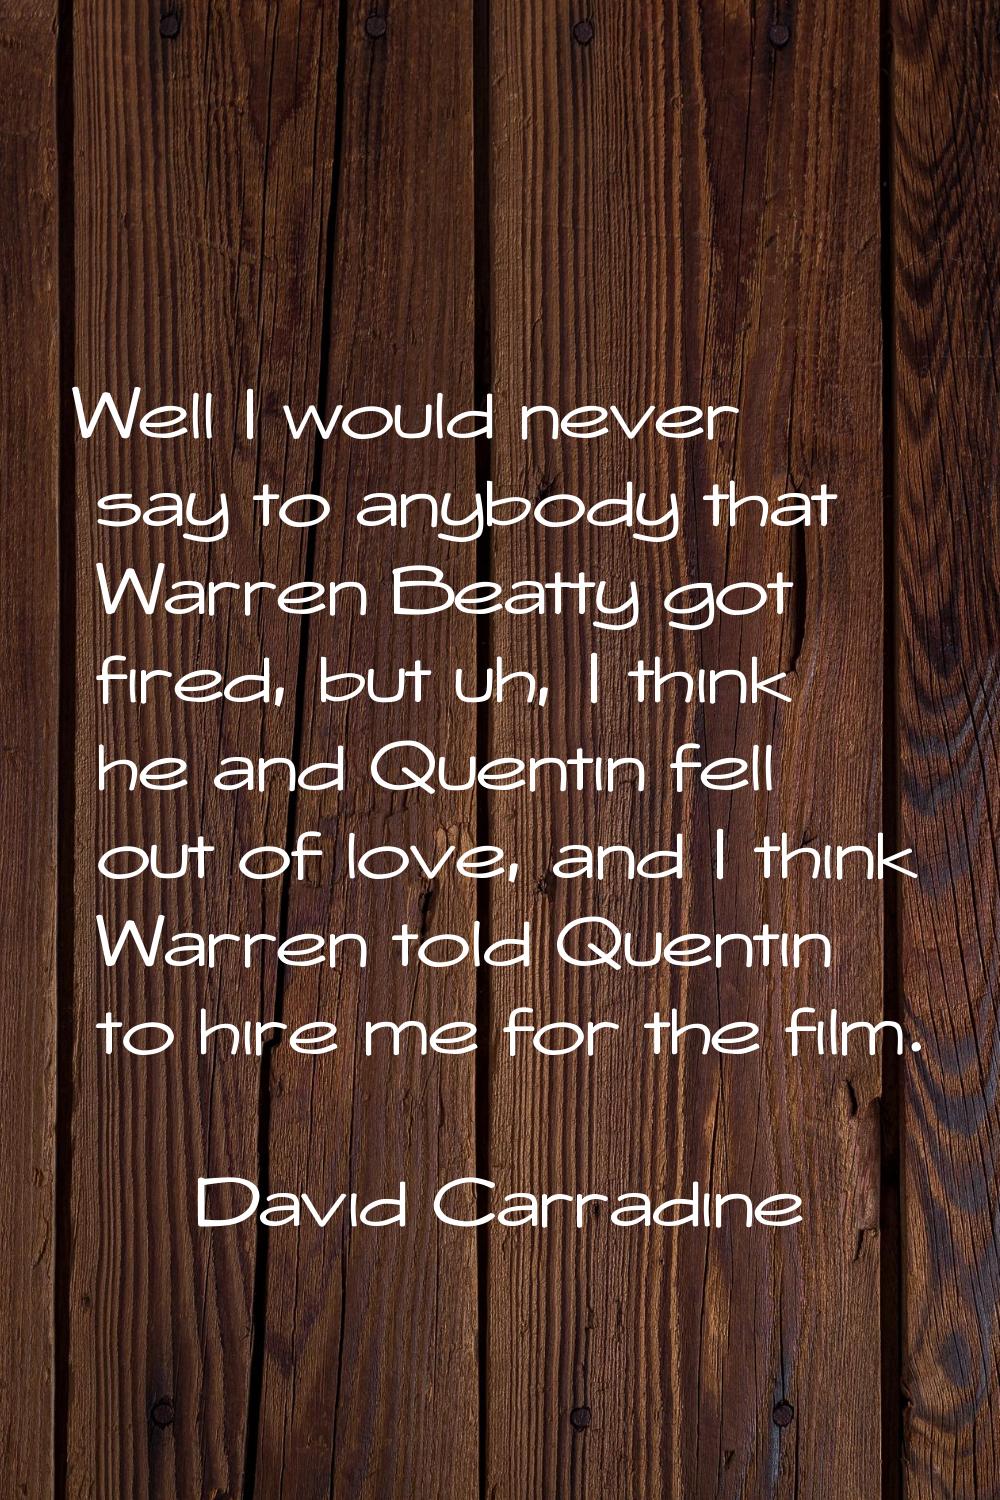 Well I would never say to anybody that Warren Beatty got fired, but uh, I think he and Quentin fell